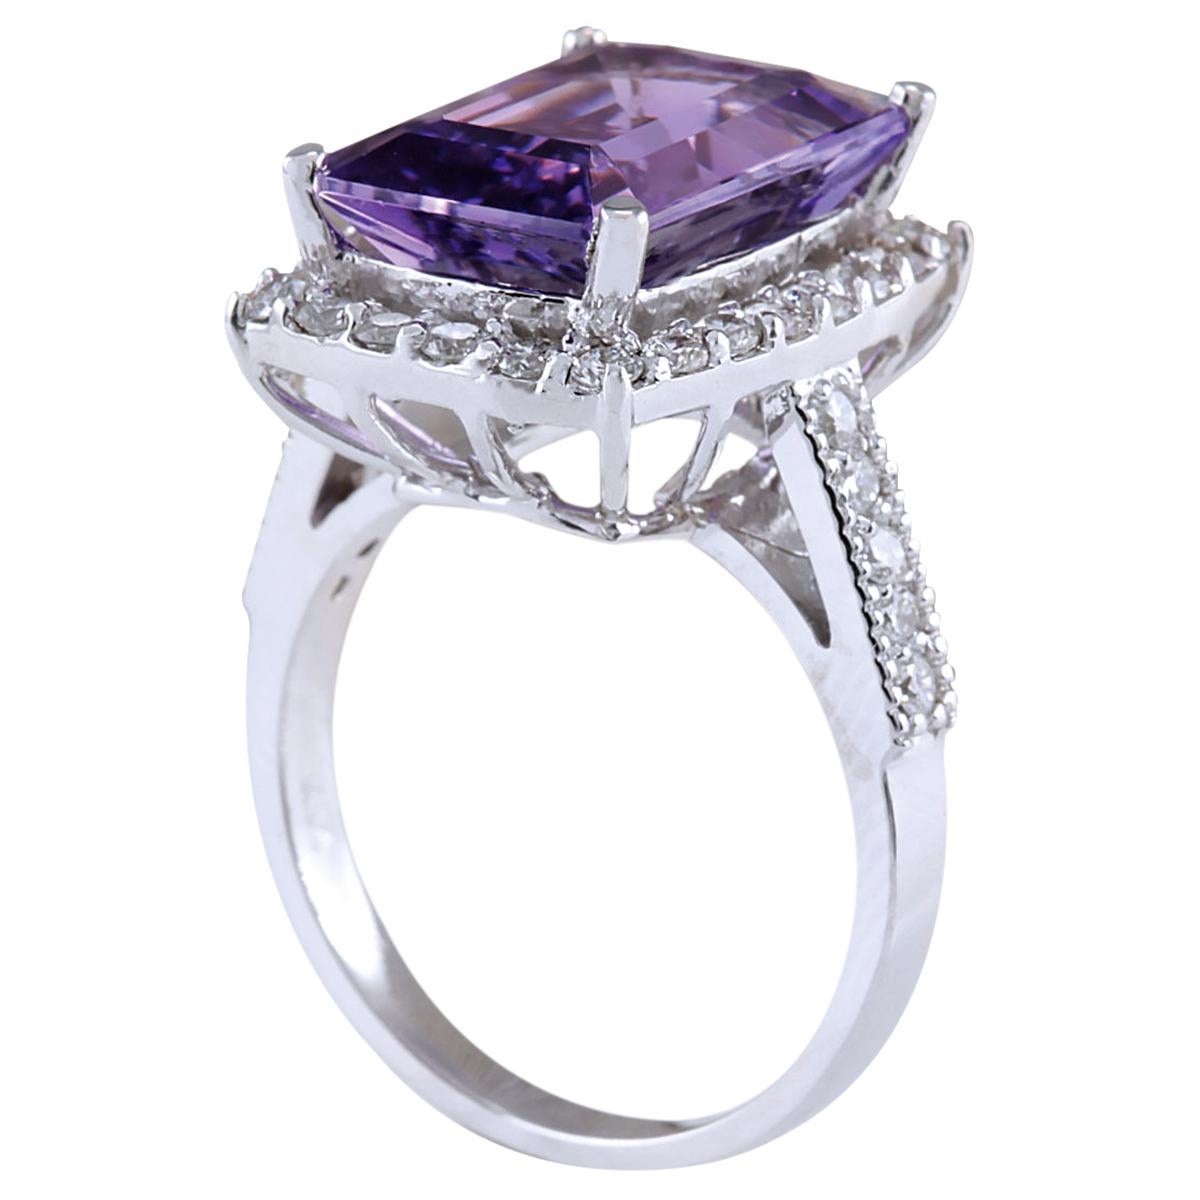 Emerald Cut Amethyst Diamond Ring In 14 Karat Solid White Gold For Sale